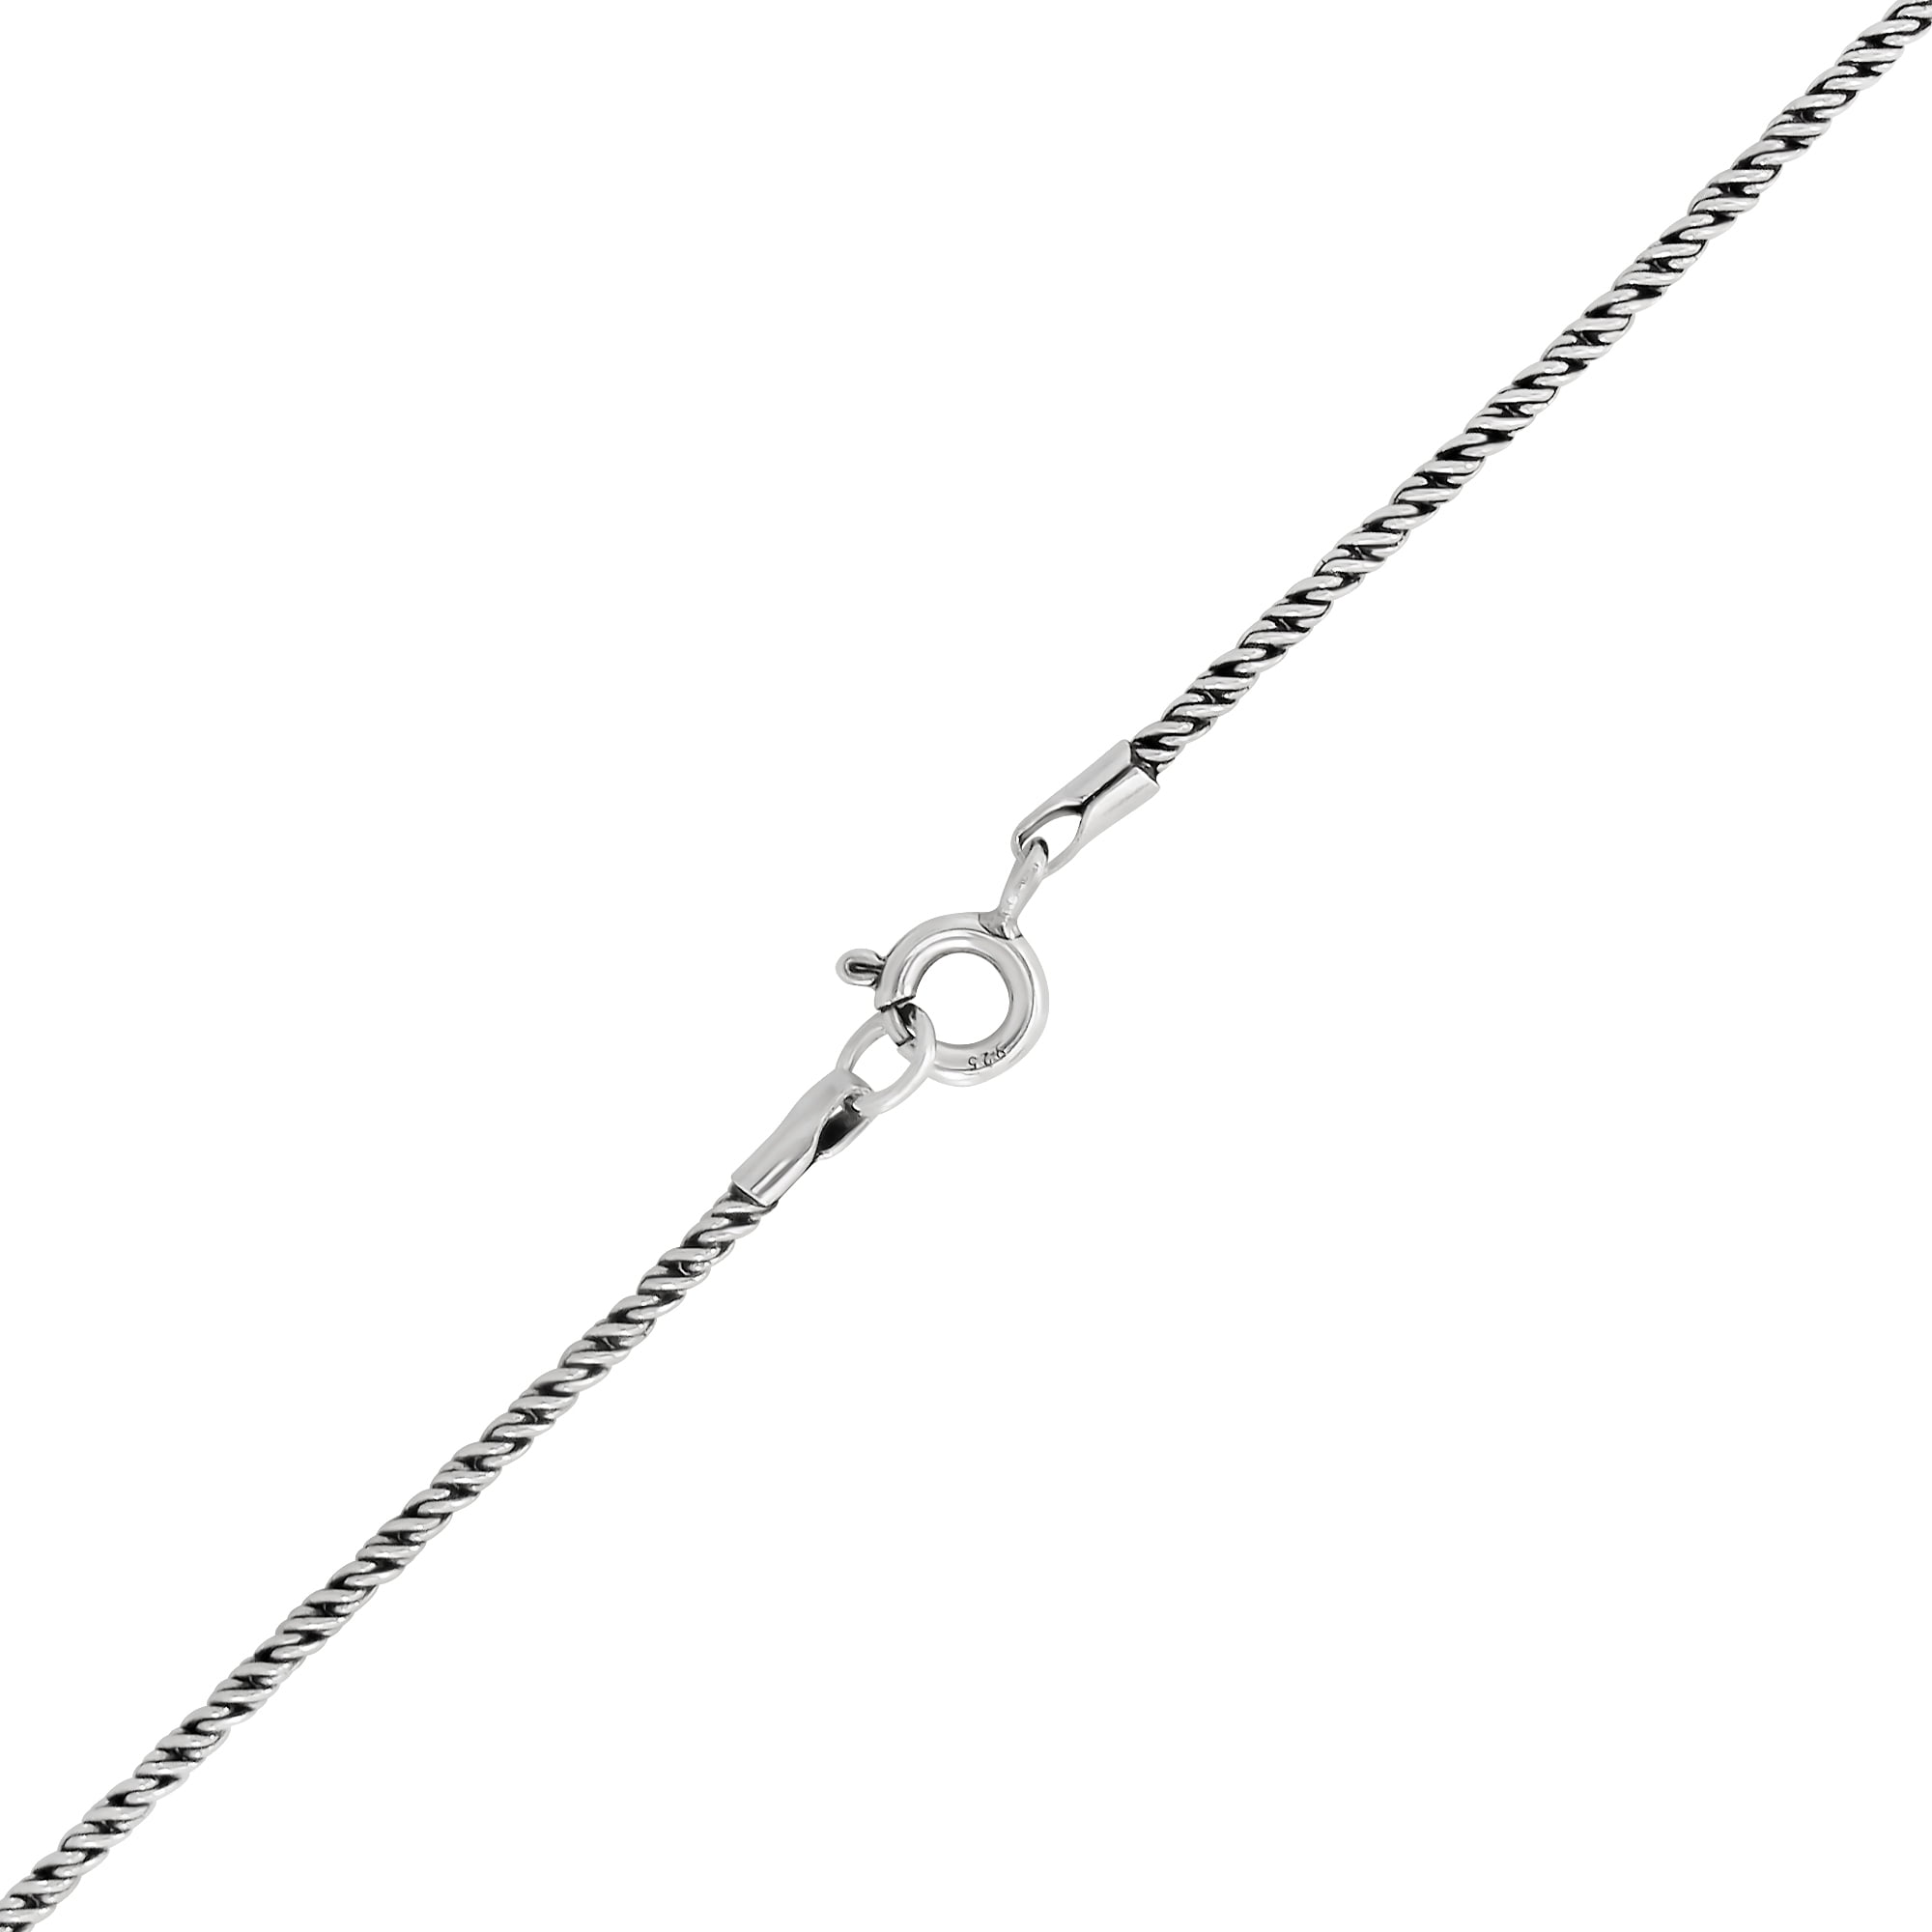 Silver Necklace Minimalist Necklace 925 Sterling High Quality Free Shipping Fine Twist Silver Chain Necklace